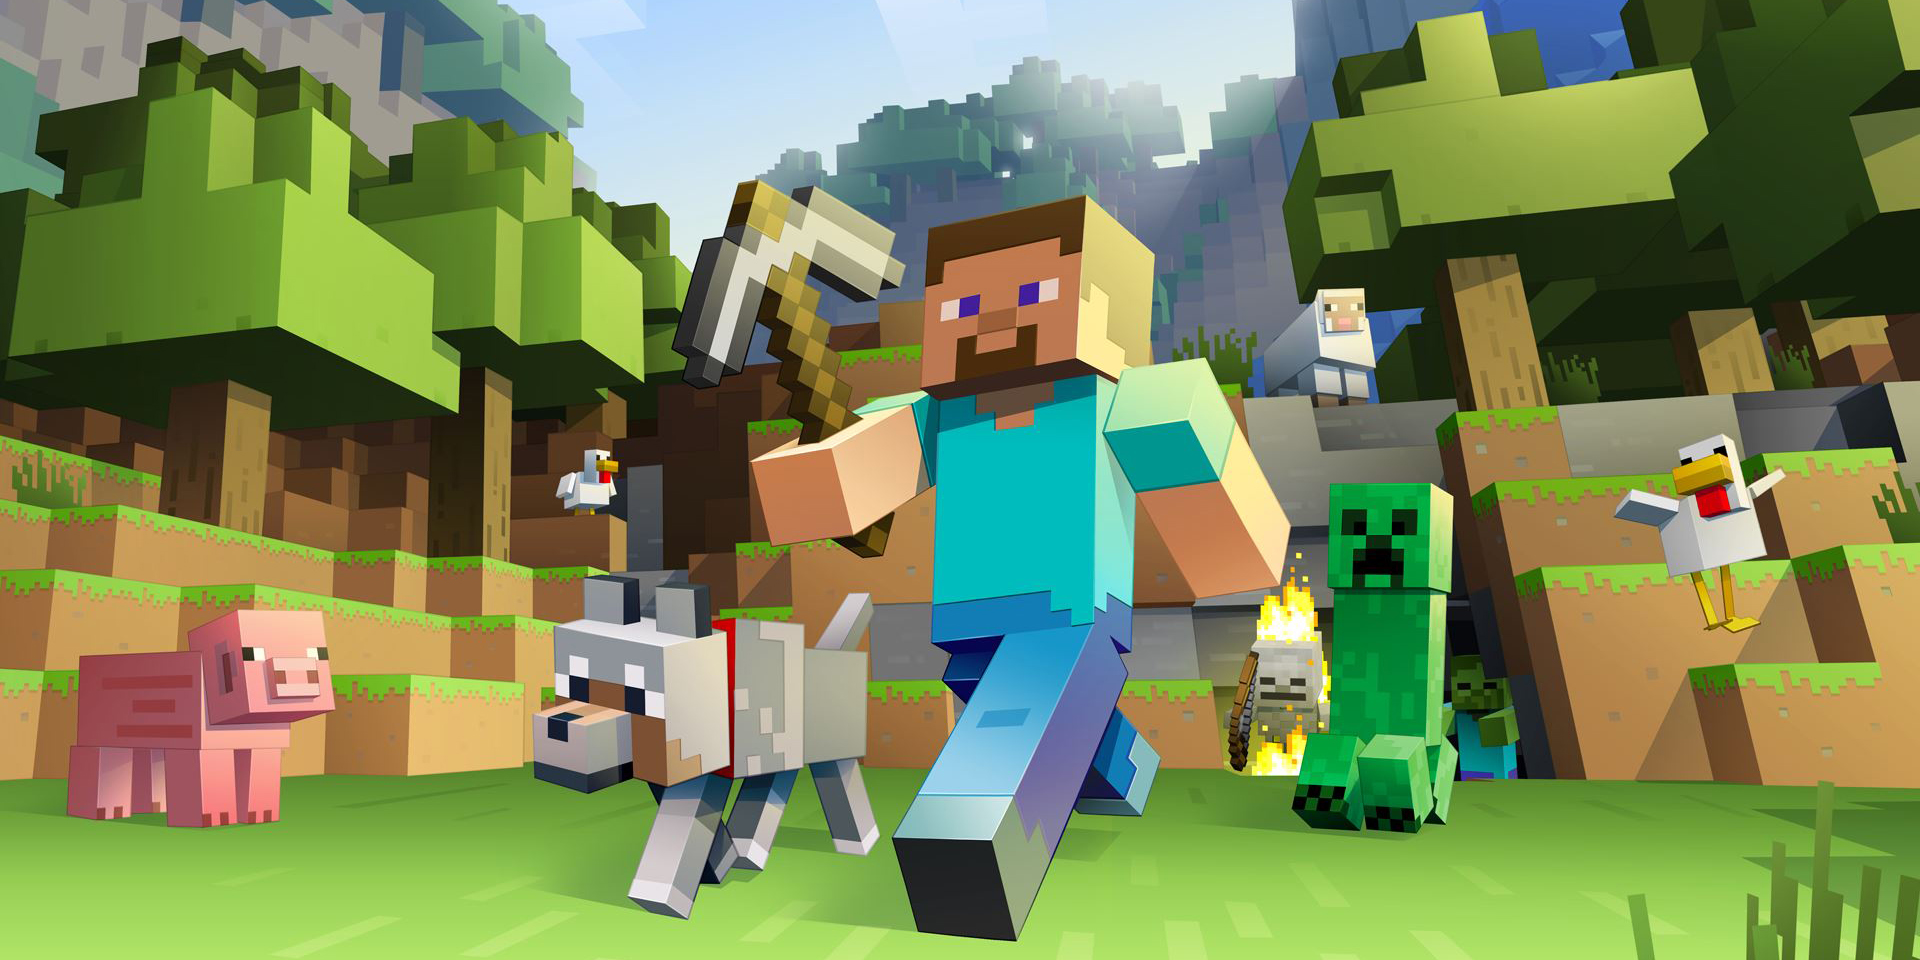 Massive, Game-Changing Update Coming to Minecraft